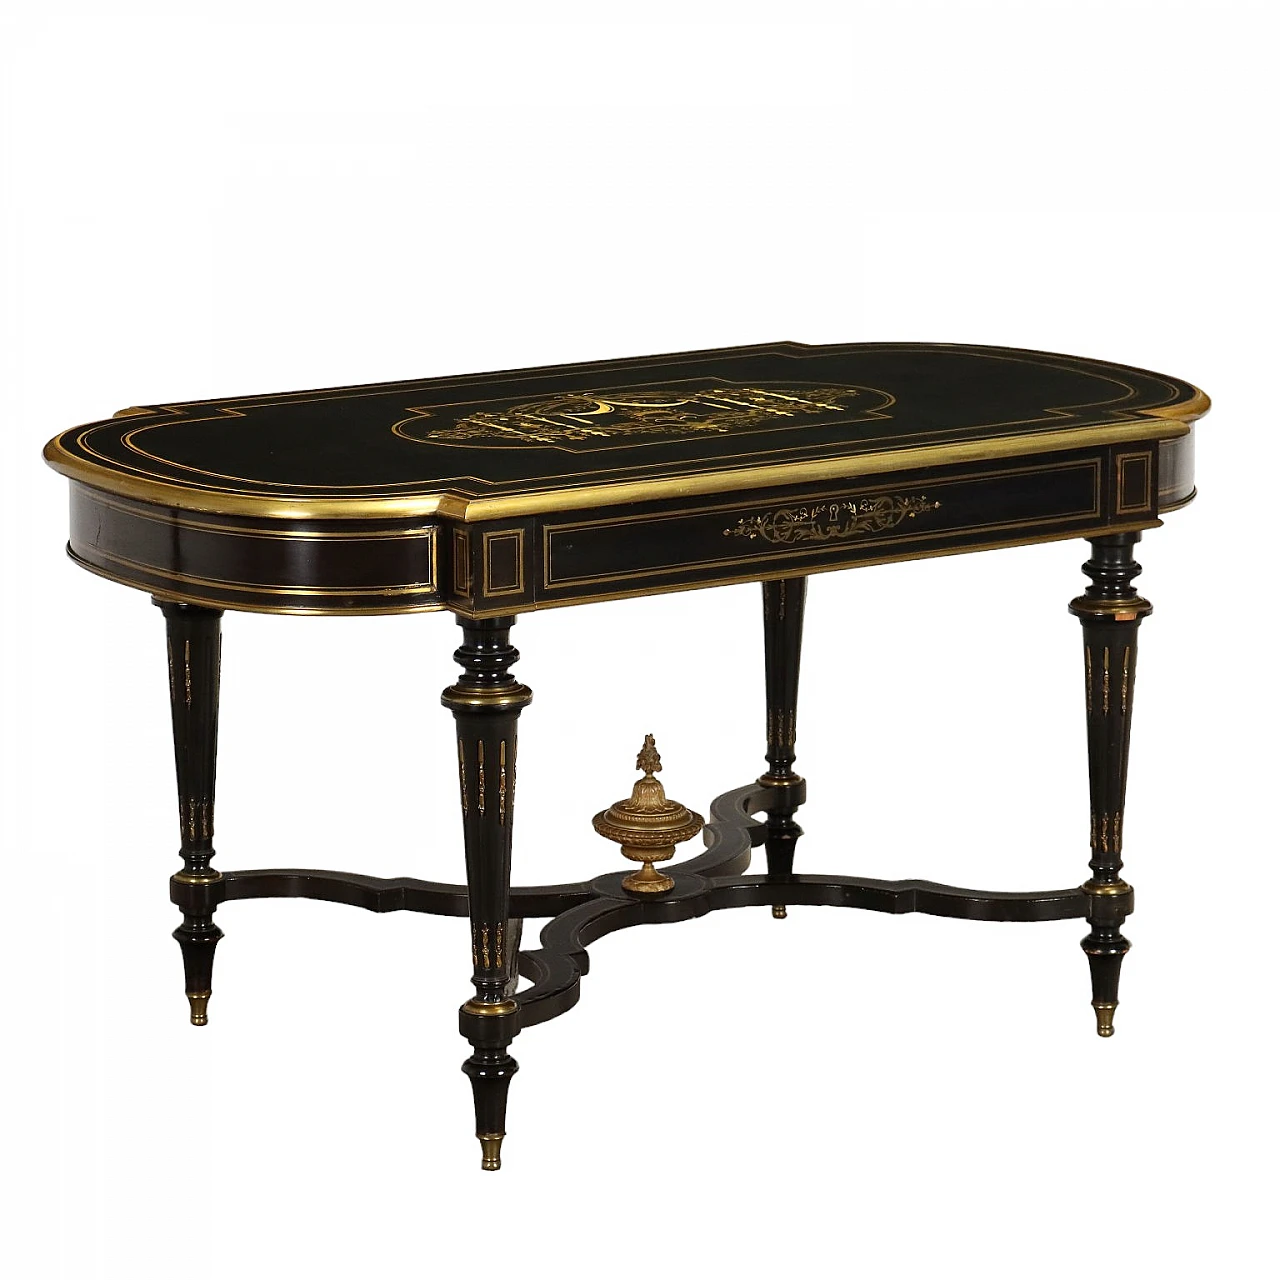 Desk in ebonised wood with bakelite, brass and mother-of-pearl inlays in Napoleon III style, early 20th century 1